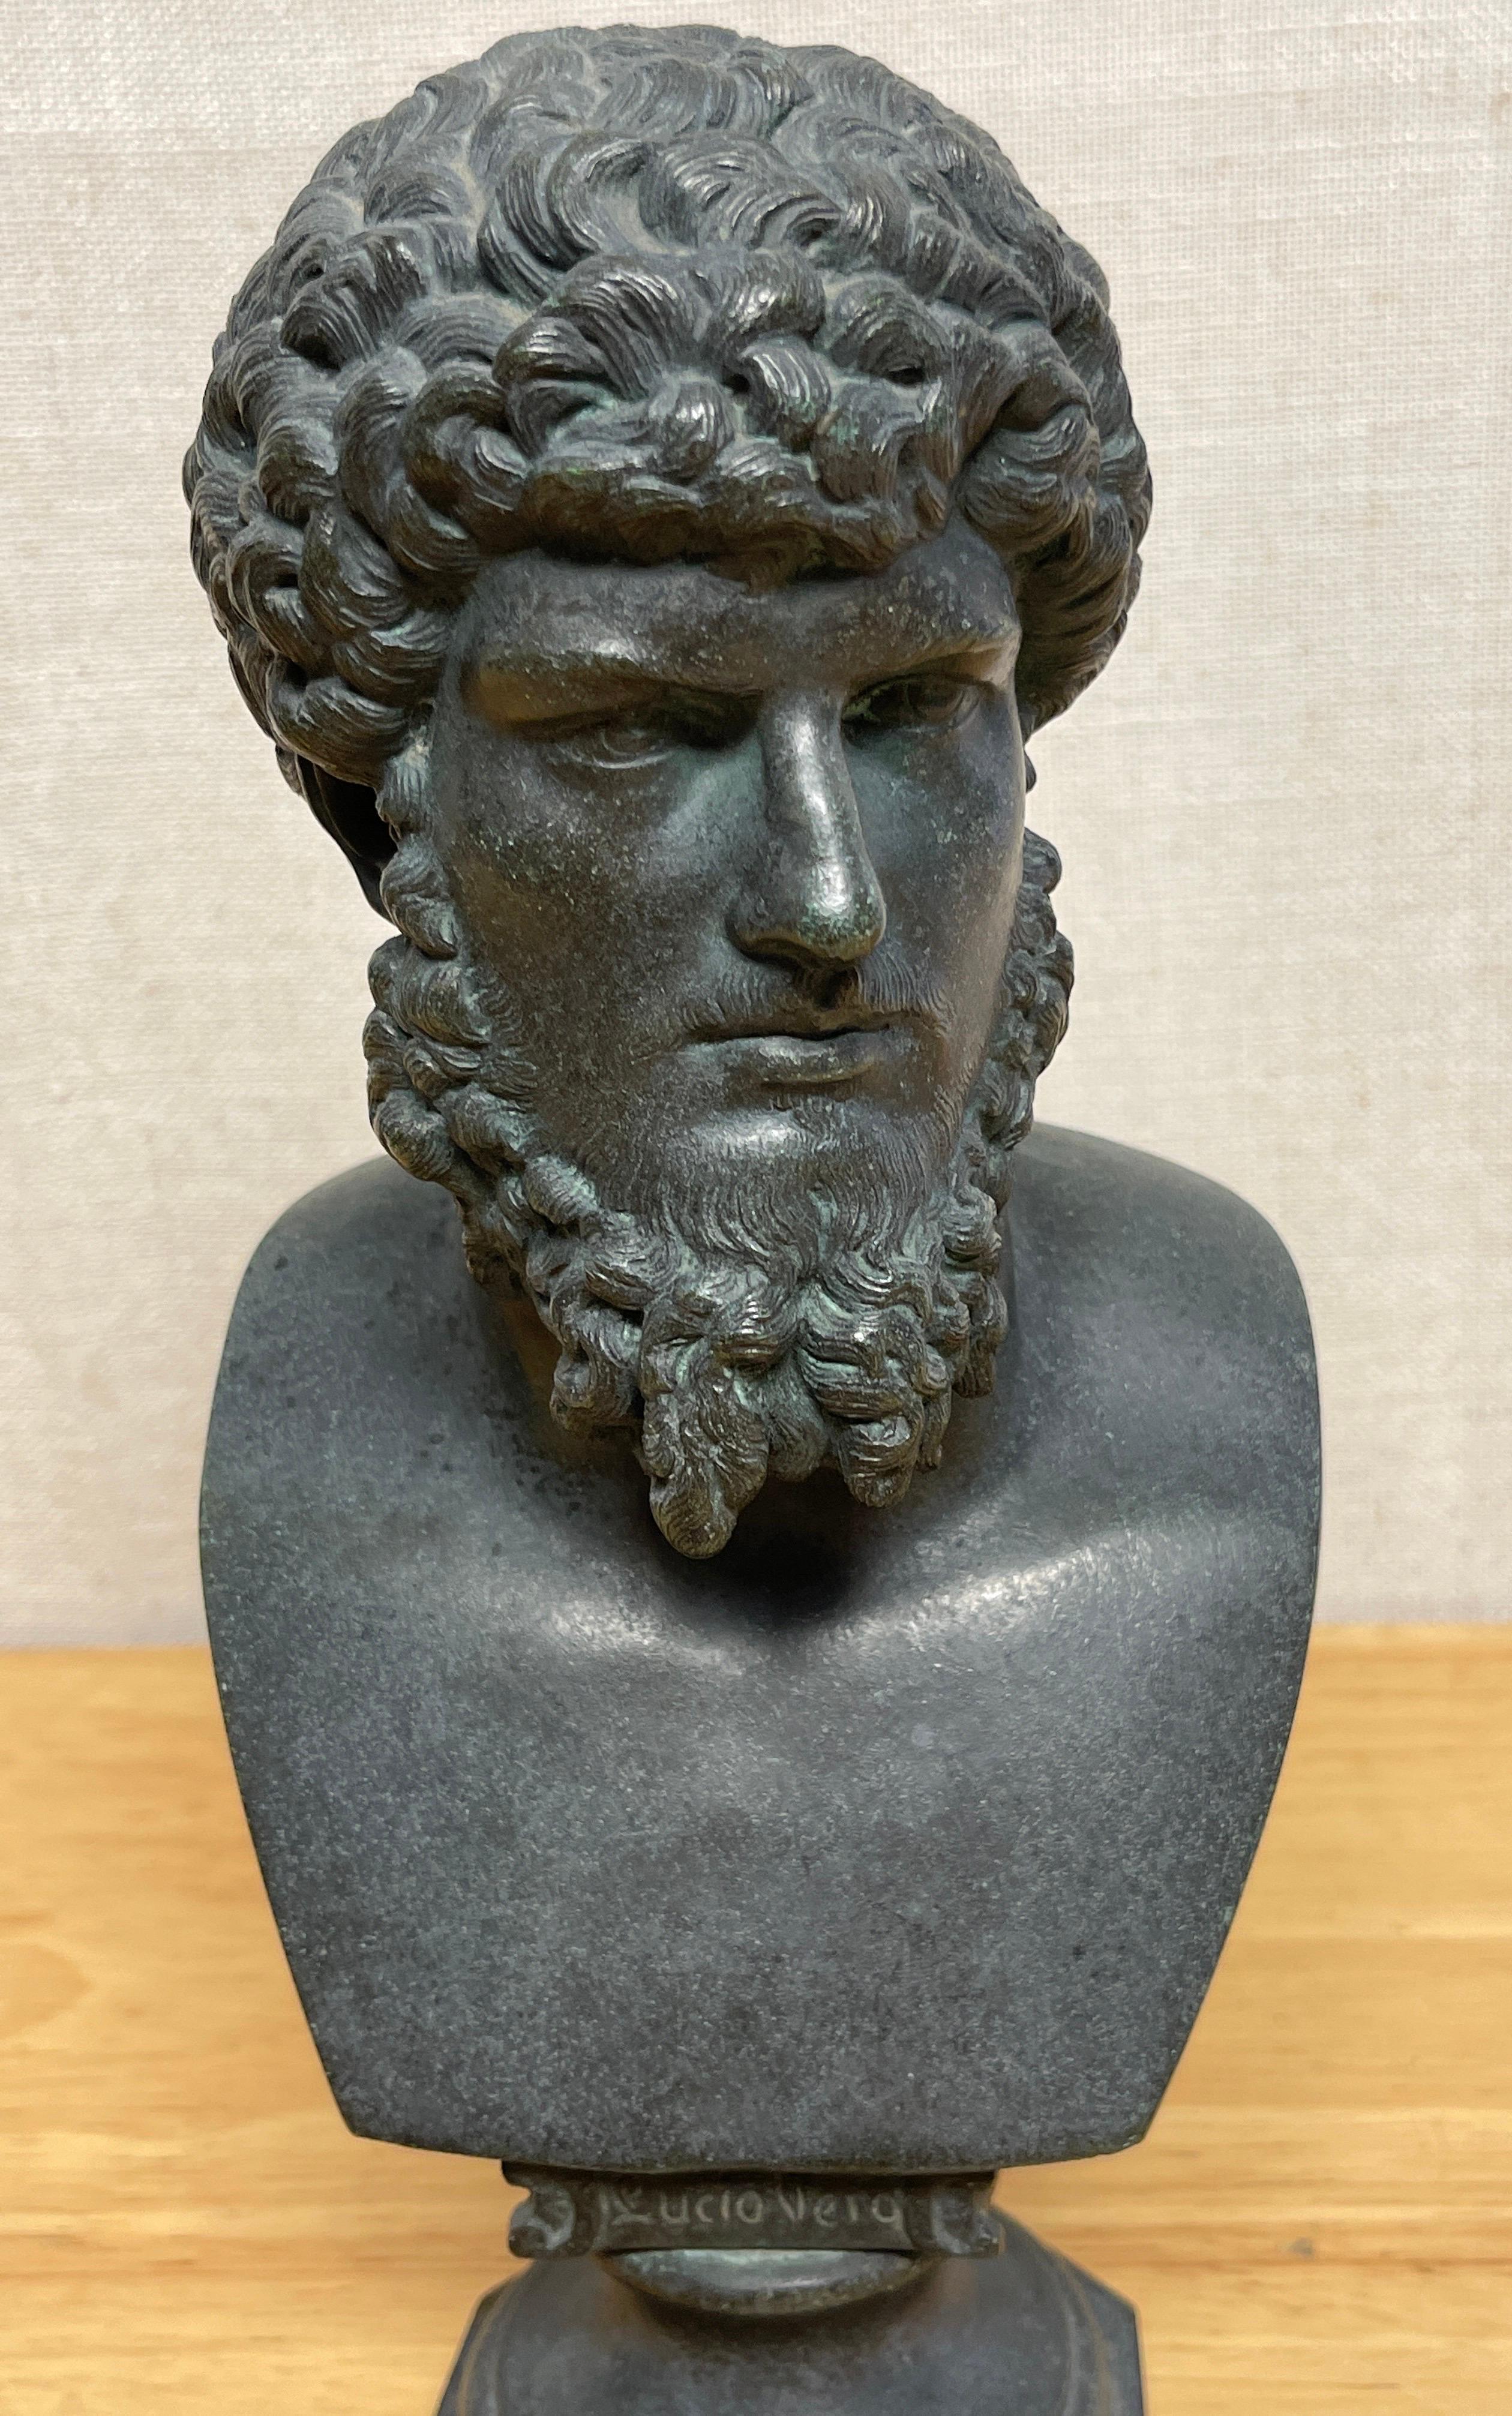 Italian 19th century grand tour portrait bust of Emperor 'Lucio Vero'
Italy, Circa 1890s

A well executed 'After the Antique' patinated bronze portrait bust inscribed 'Lucio Vero' (Lucius Verus) 

 'Lucio Vero'/ Lucius Verus (130 AD- 169